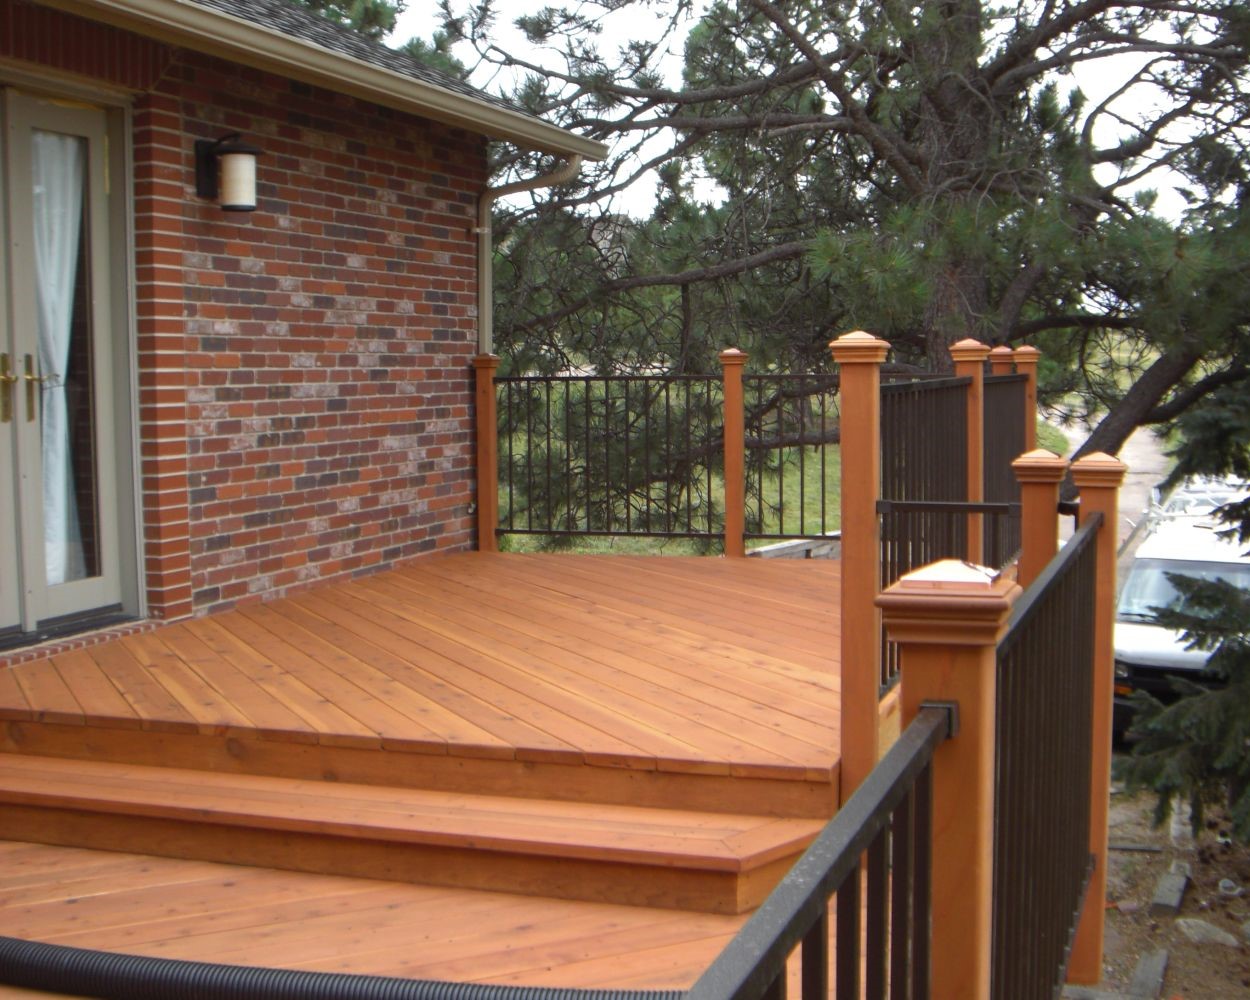 Multi-level Redwood deck with 45-degree angle boards. The railing is built with wood posts and metal panels between the posts.